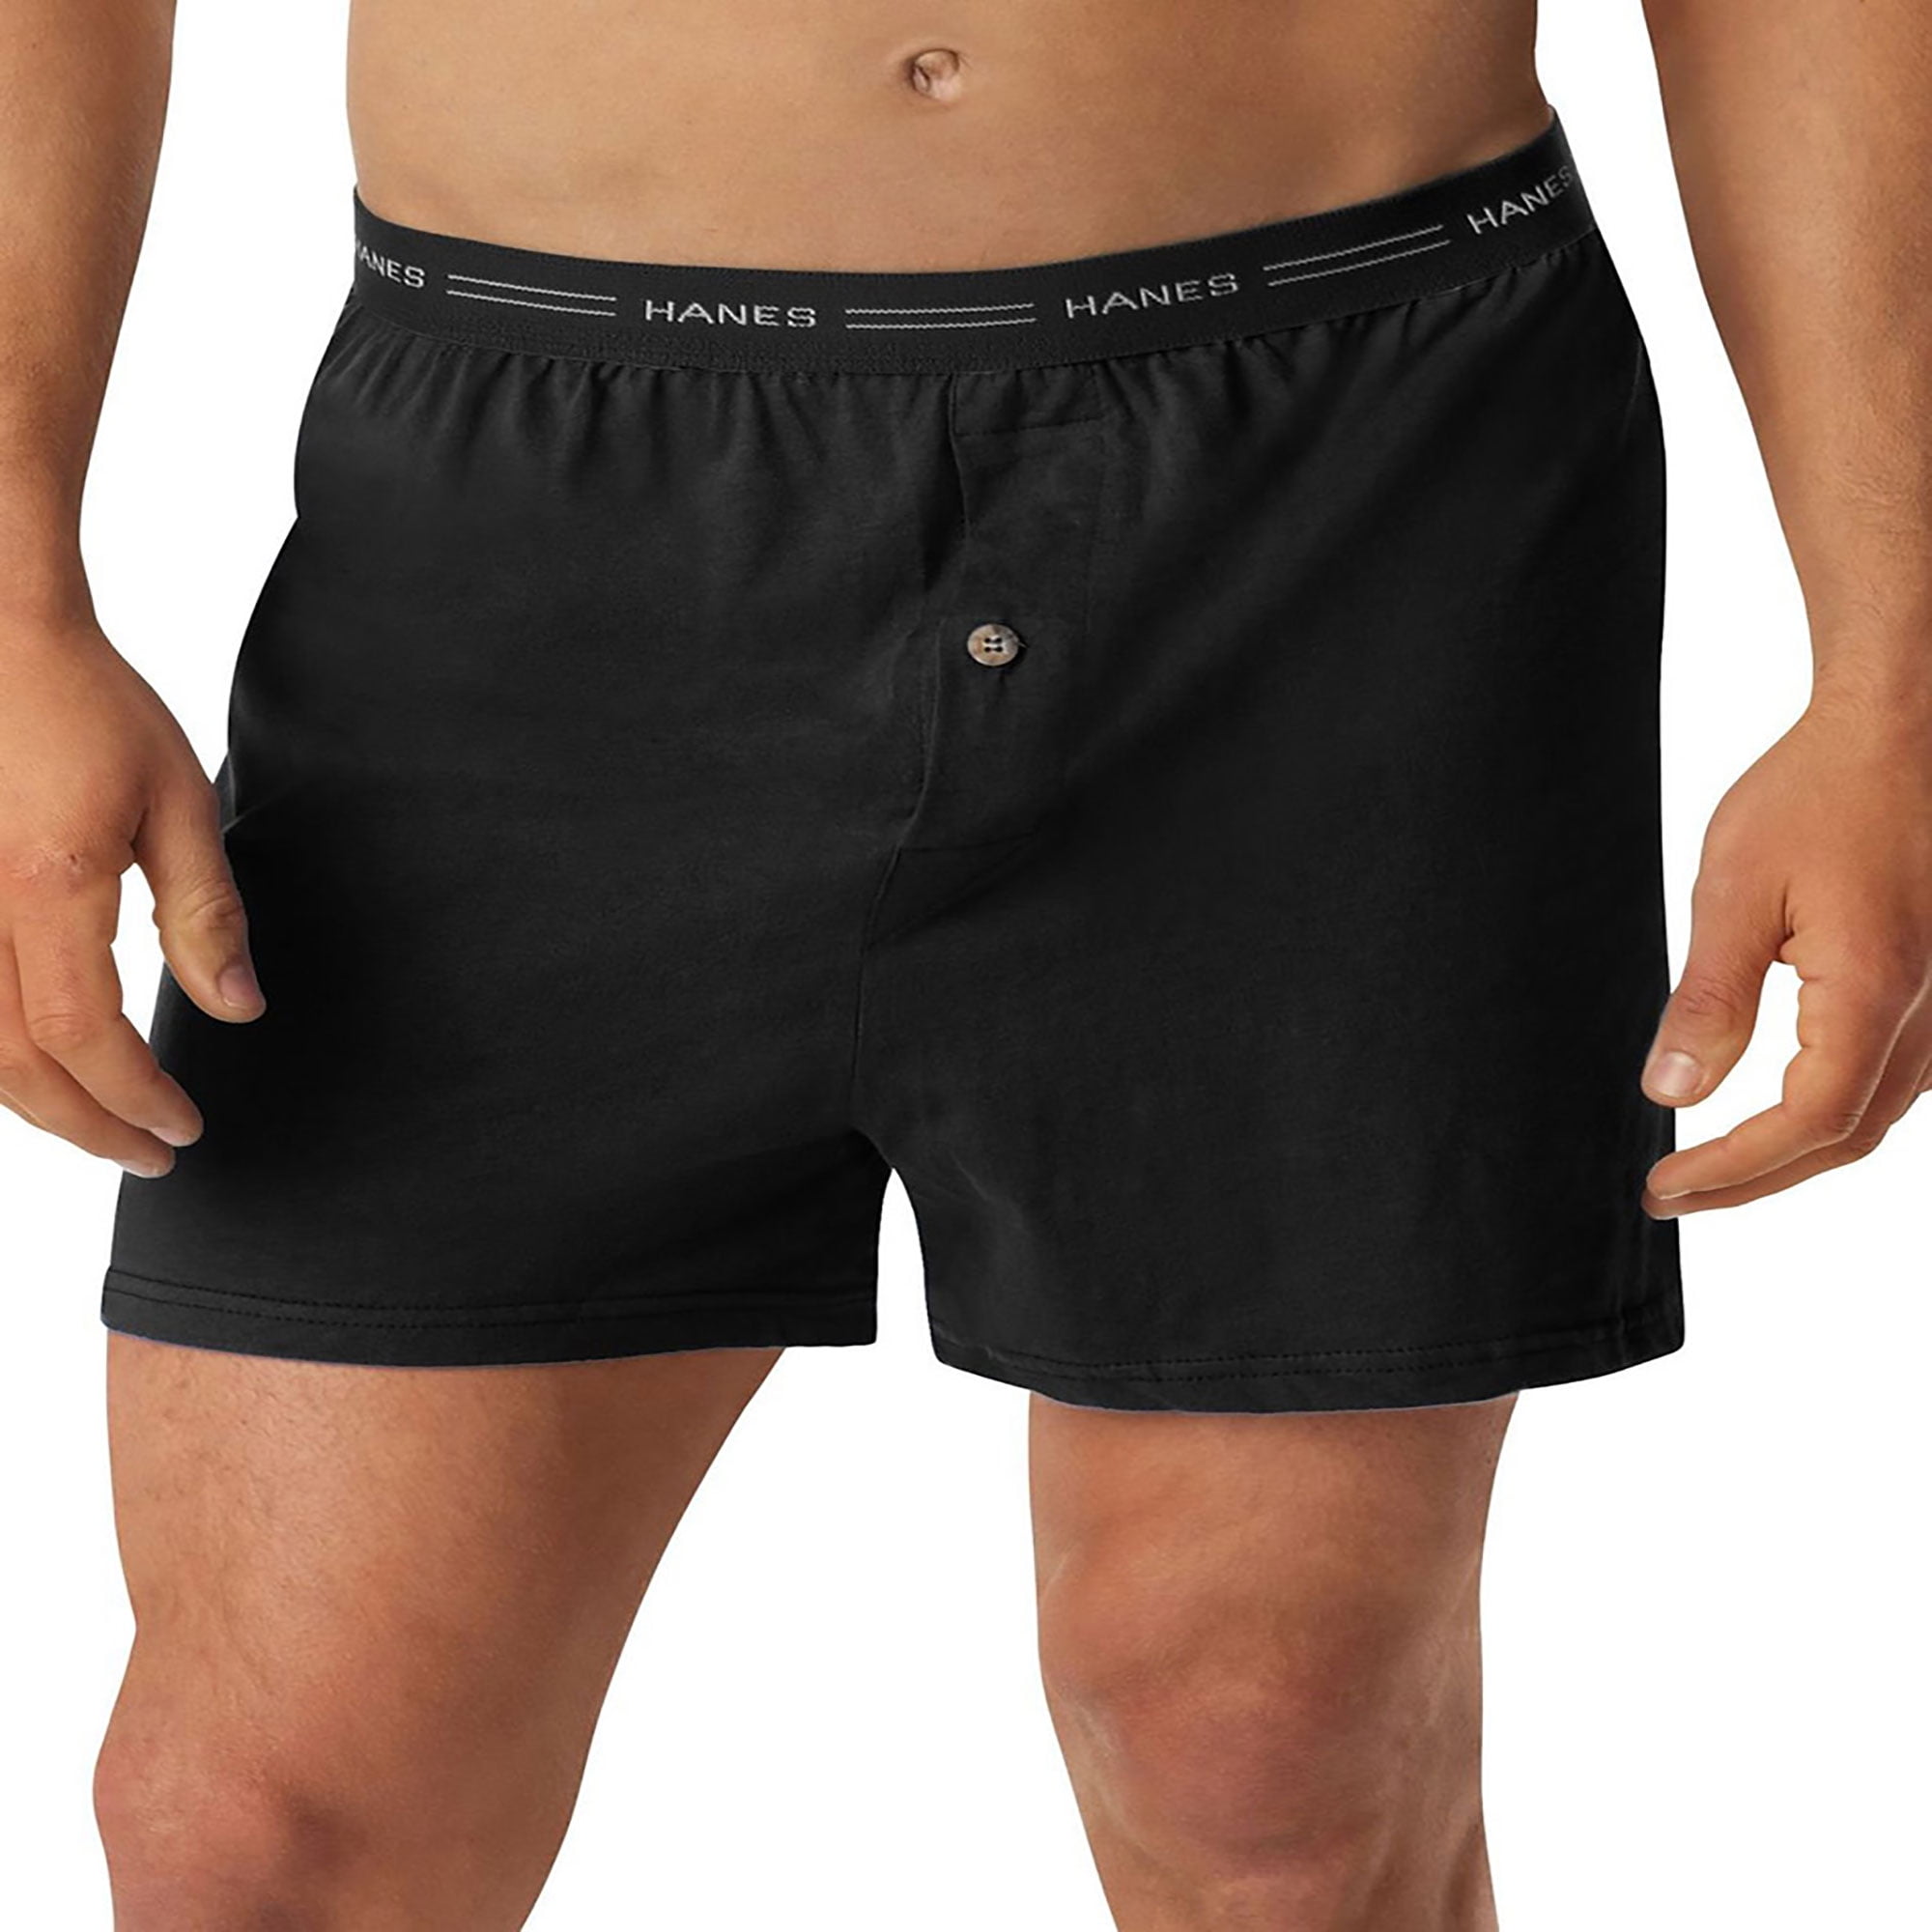 Hanes - Hanes Men's Exposed Waistband Knit Boxer 2 Pack, Style 548KP2 ...